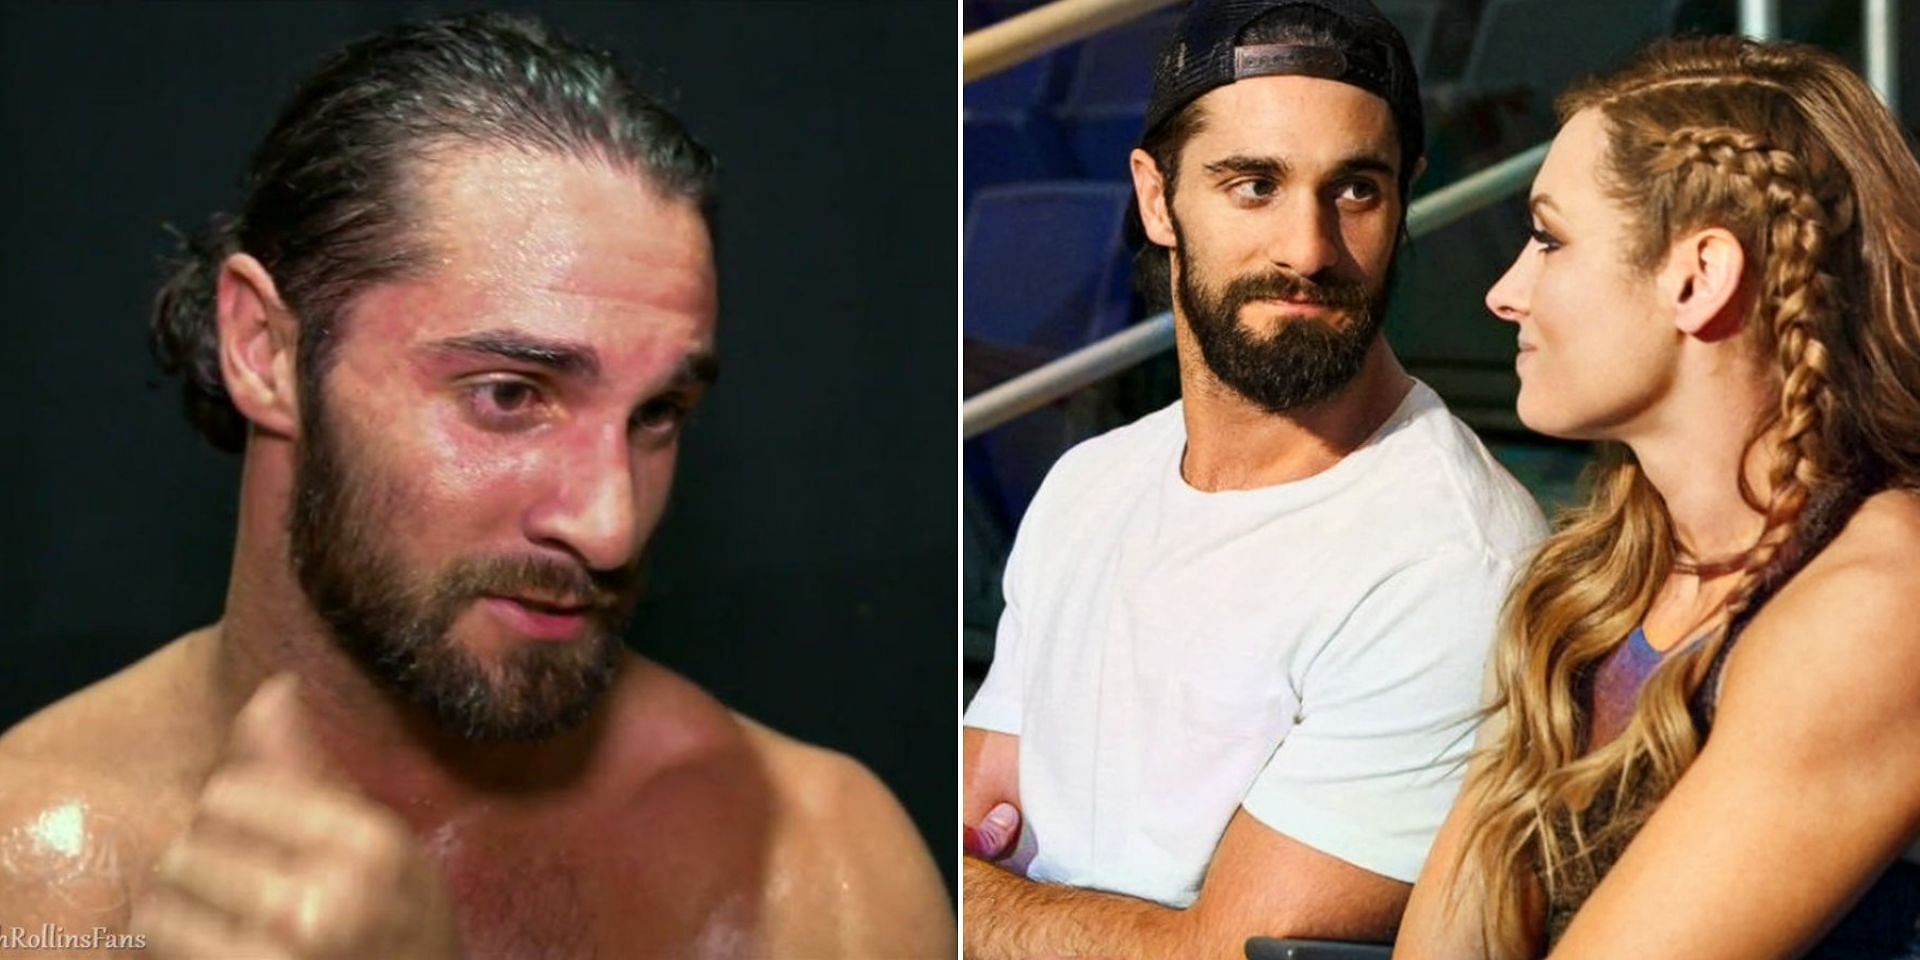 Seth Rollins and Becky Lynch are WWE